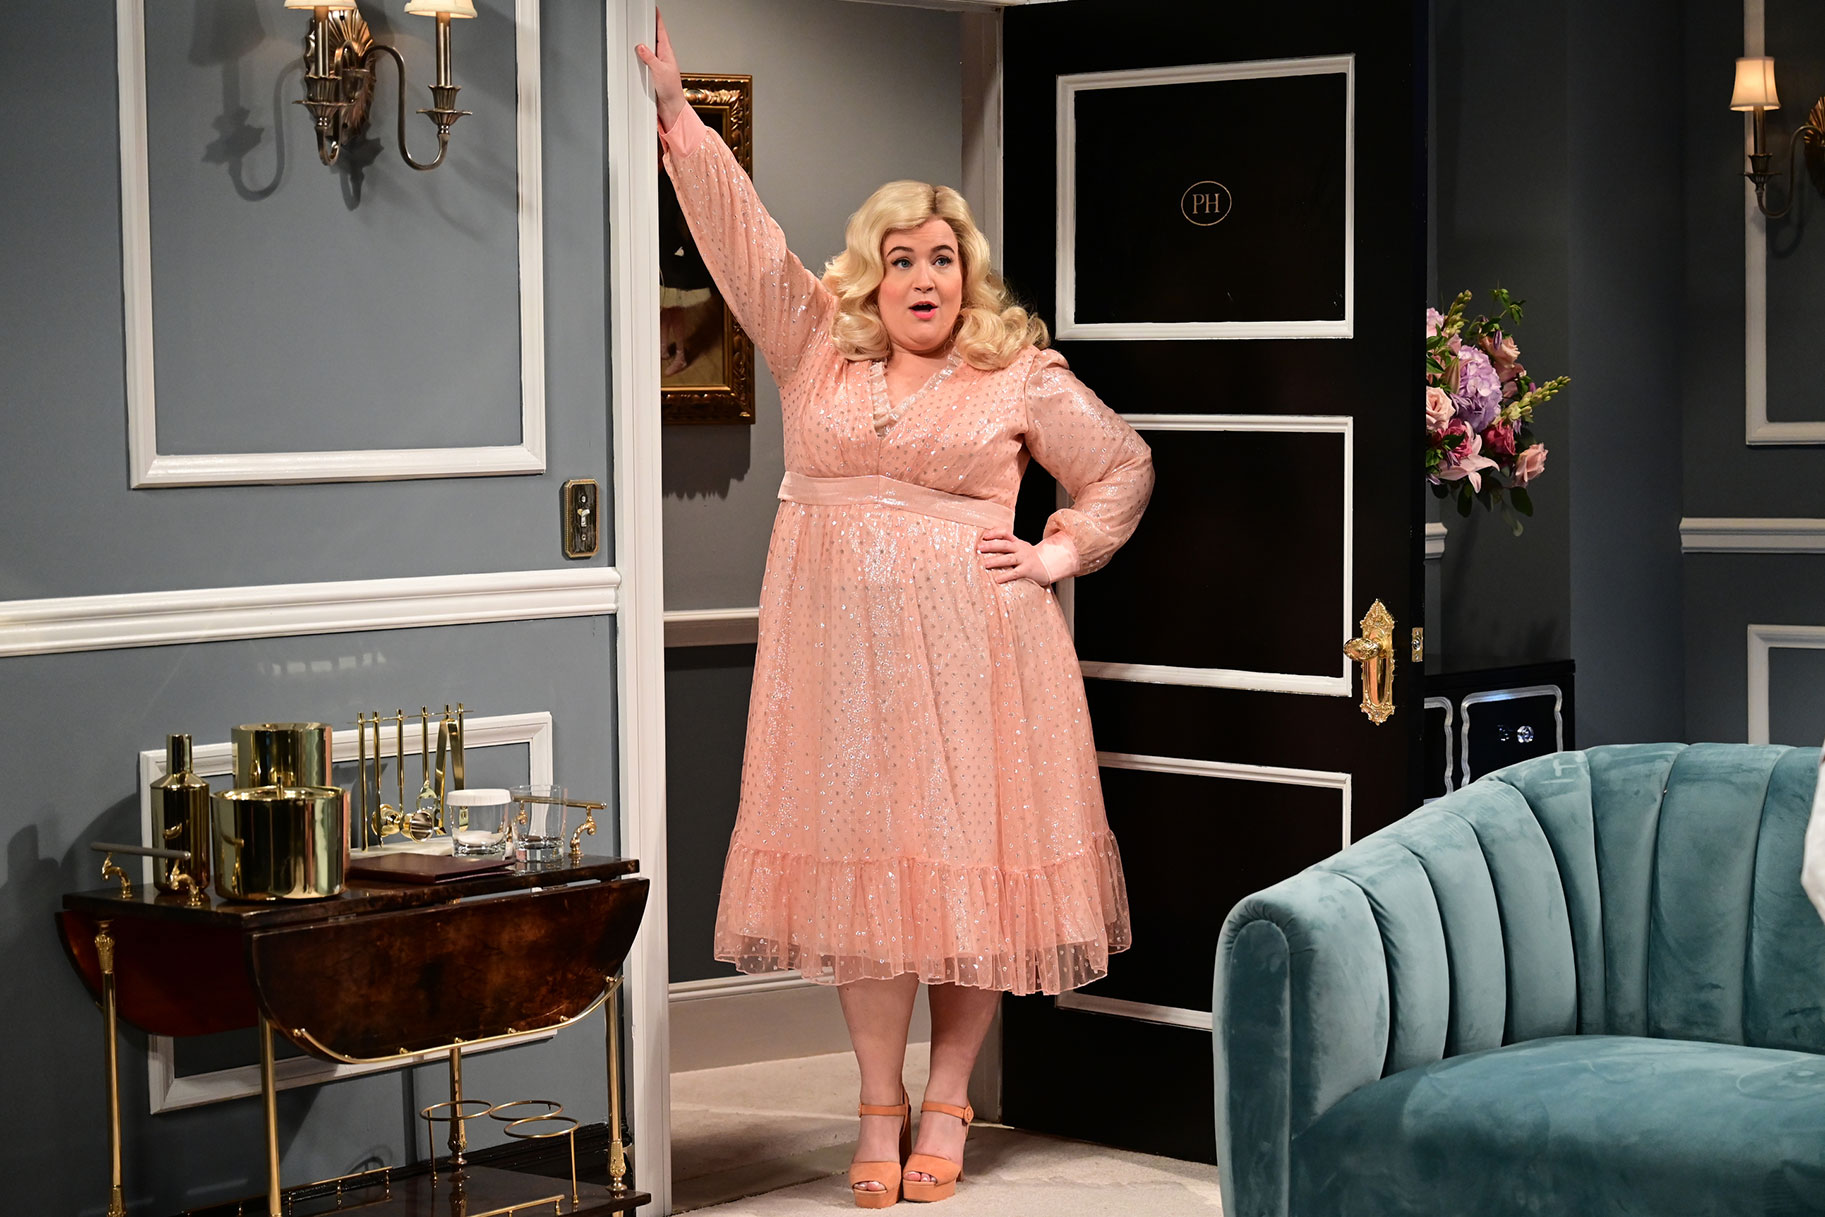 Aidy Bryant leaning against a door frame